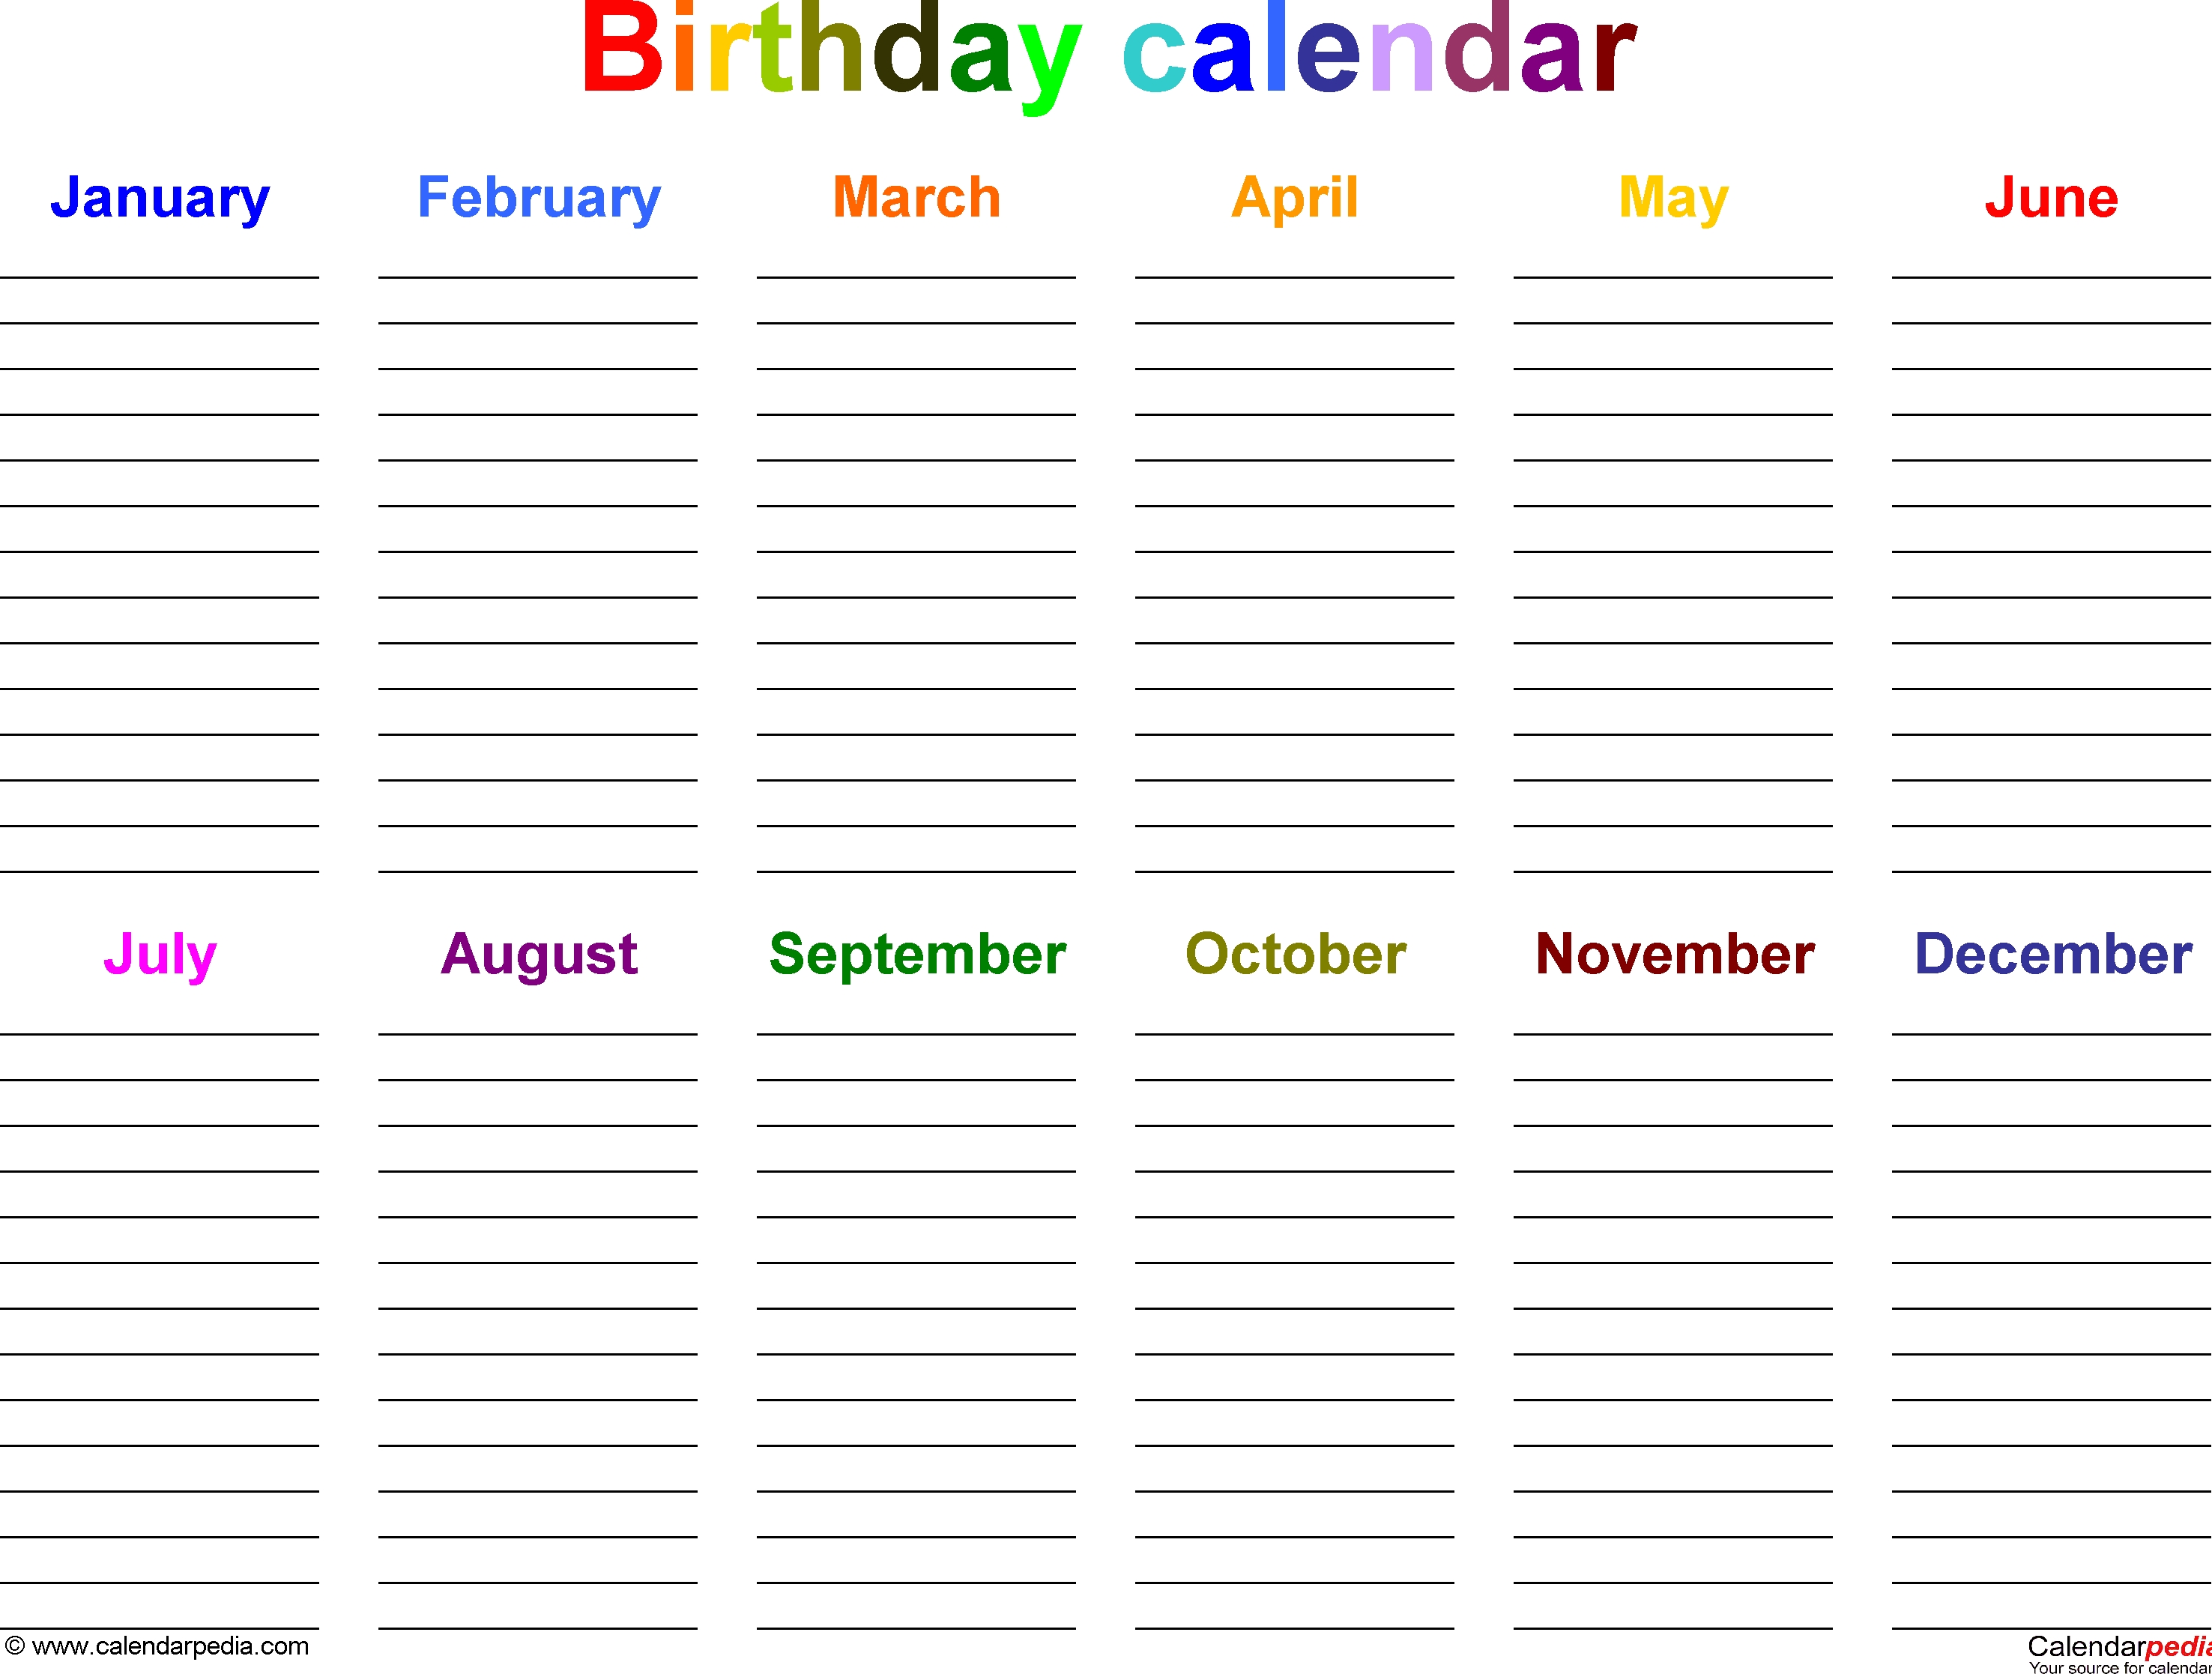 Excel Template For Birthday Calendar In Color (Landscape Extraordinary How To Make A Count Down Calander With Excel